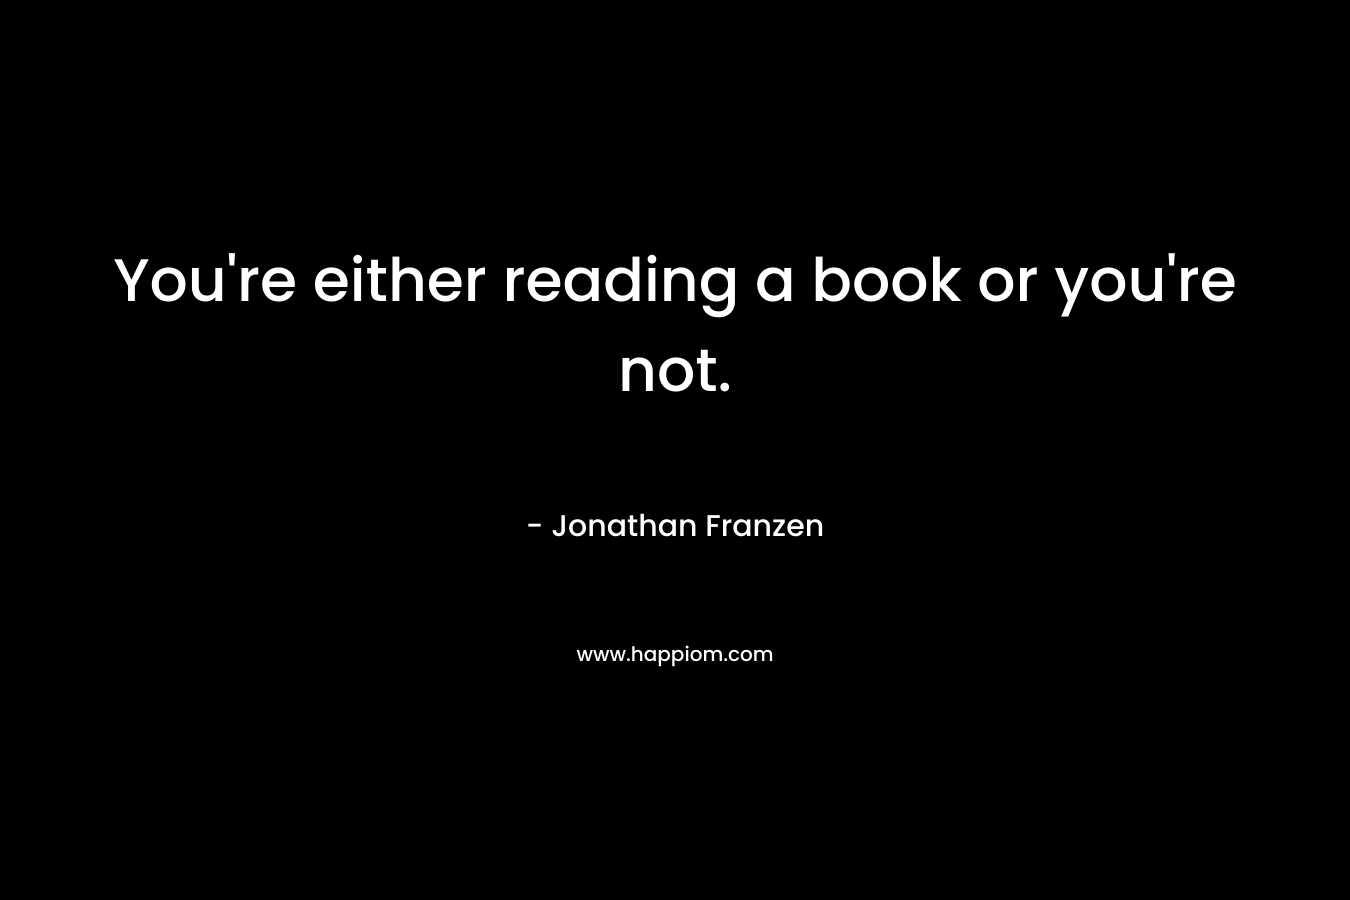 You're either reading a book or you're not.